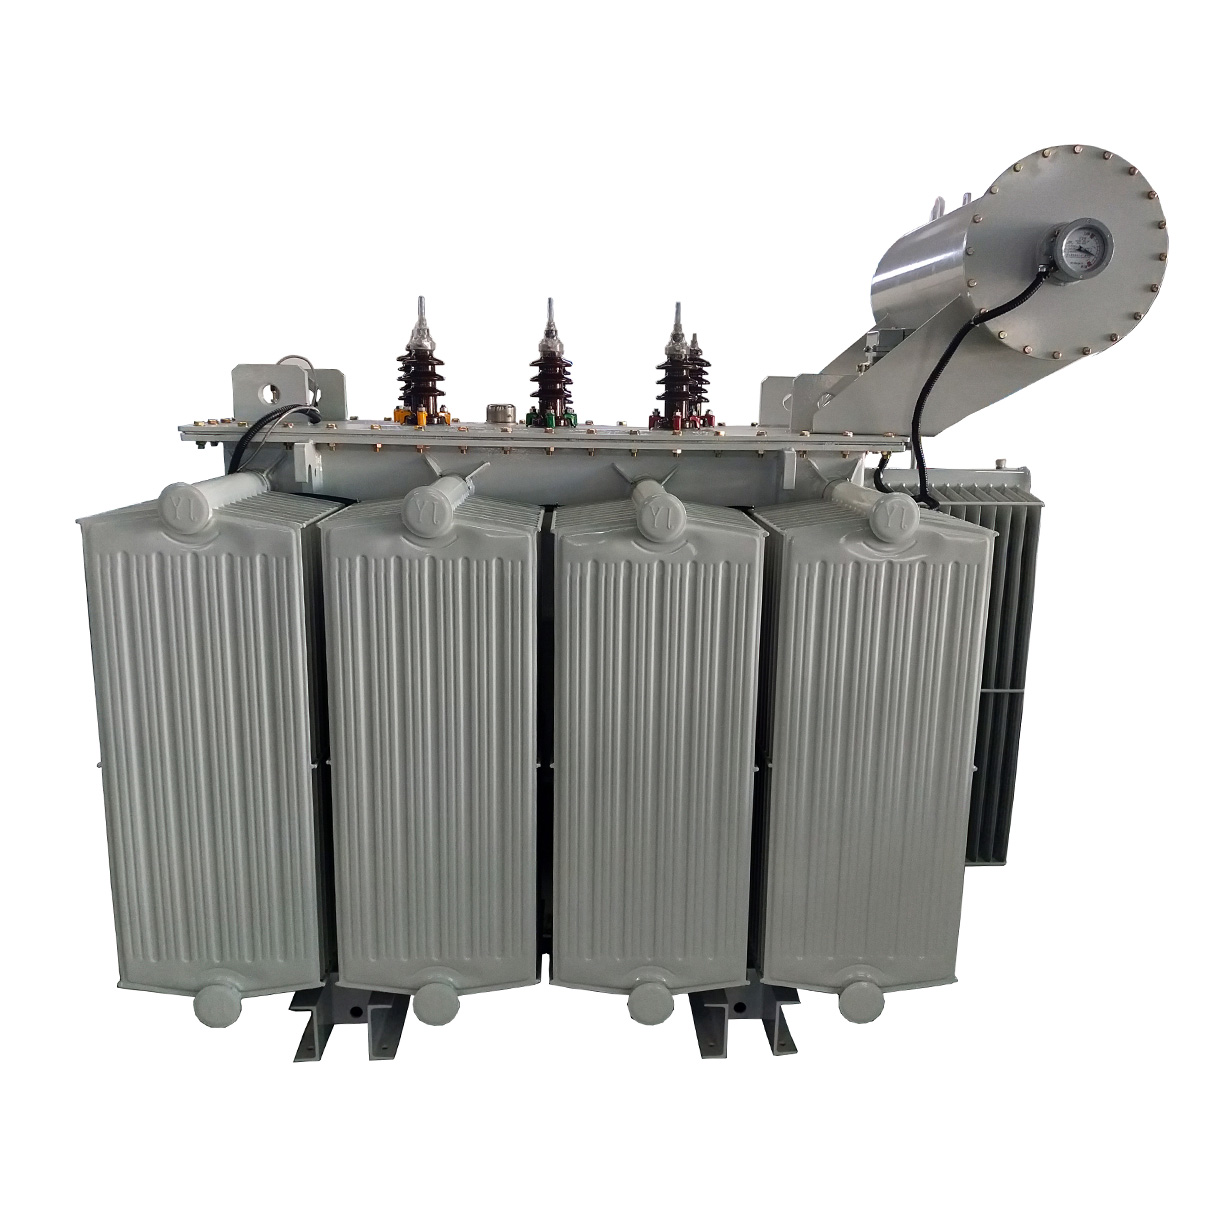 Oil immersed transformer with conservator